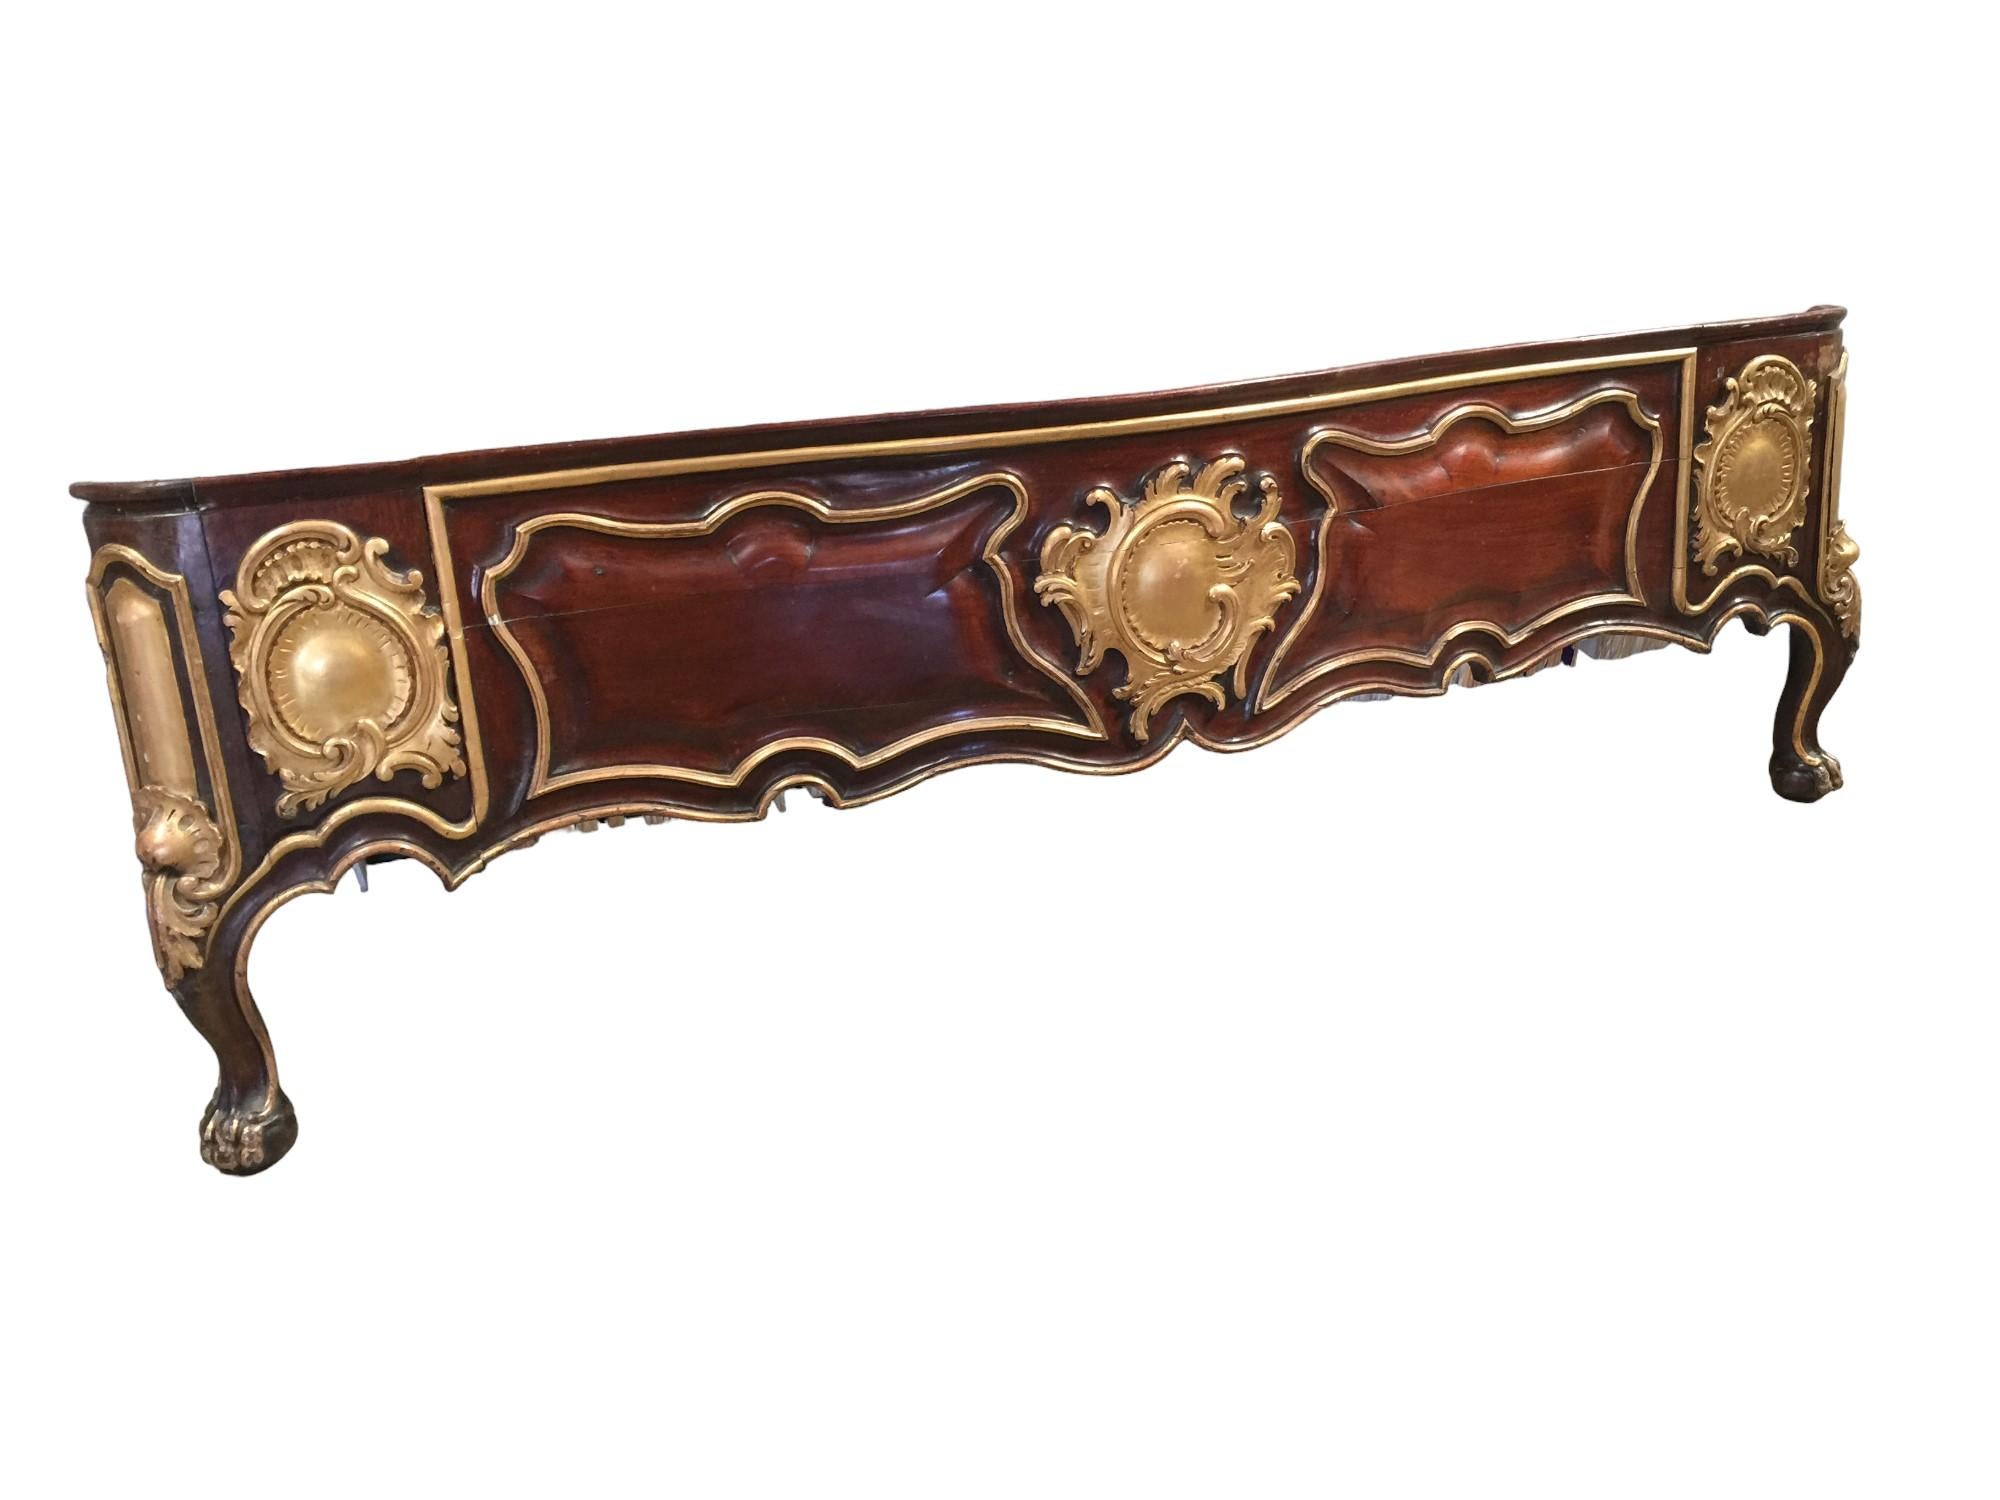 Italian Gilt Bed in Period Red Walnut In Good Condition For Sale In Cranbrook, Kent